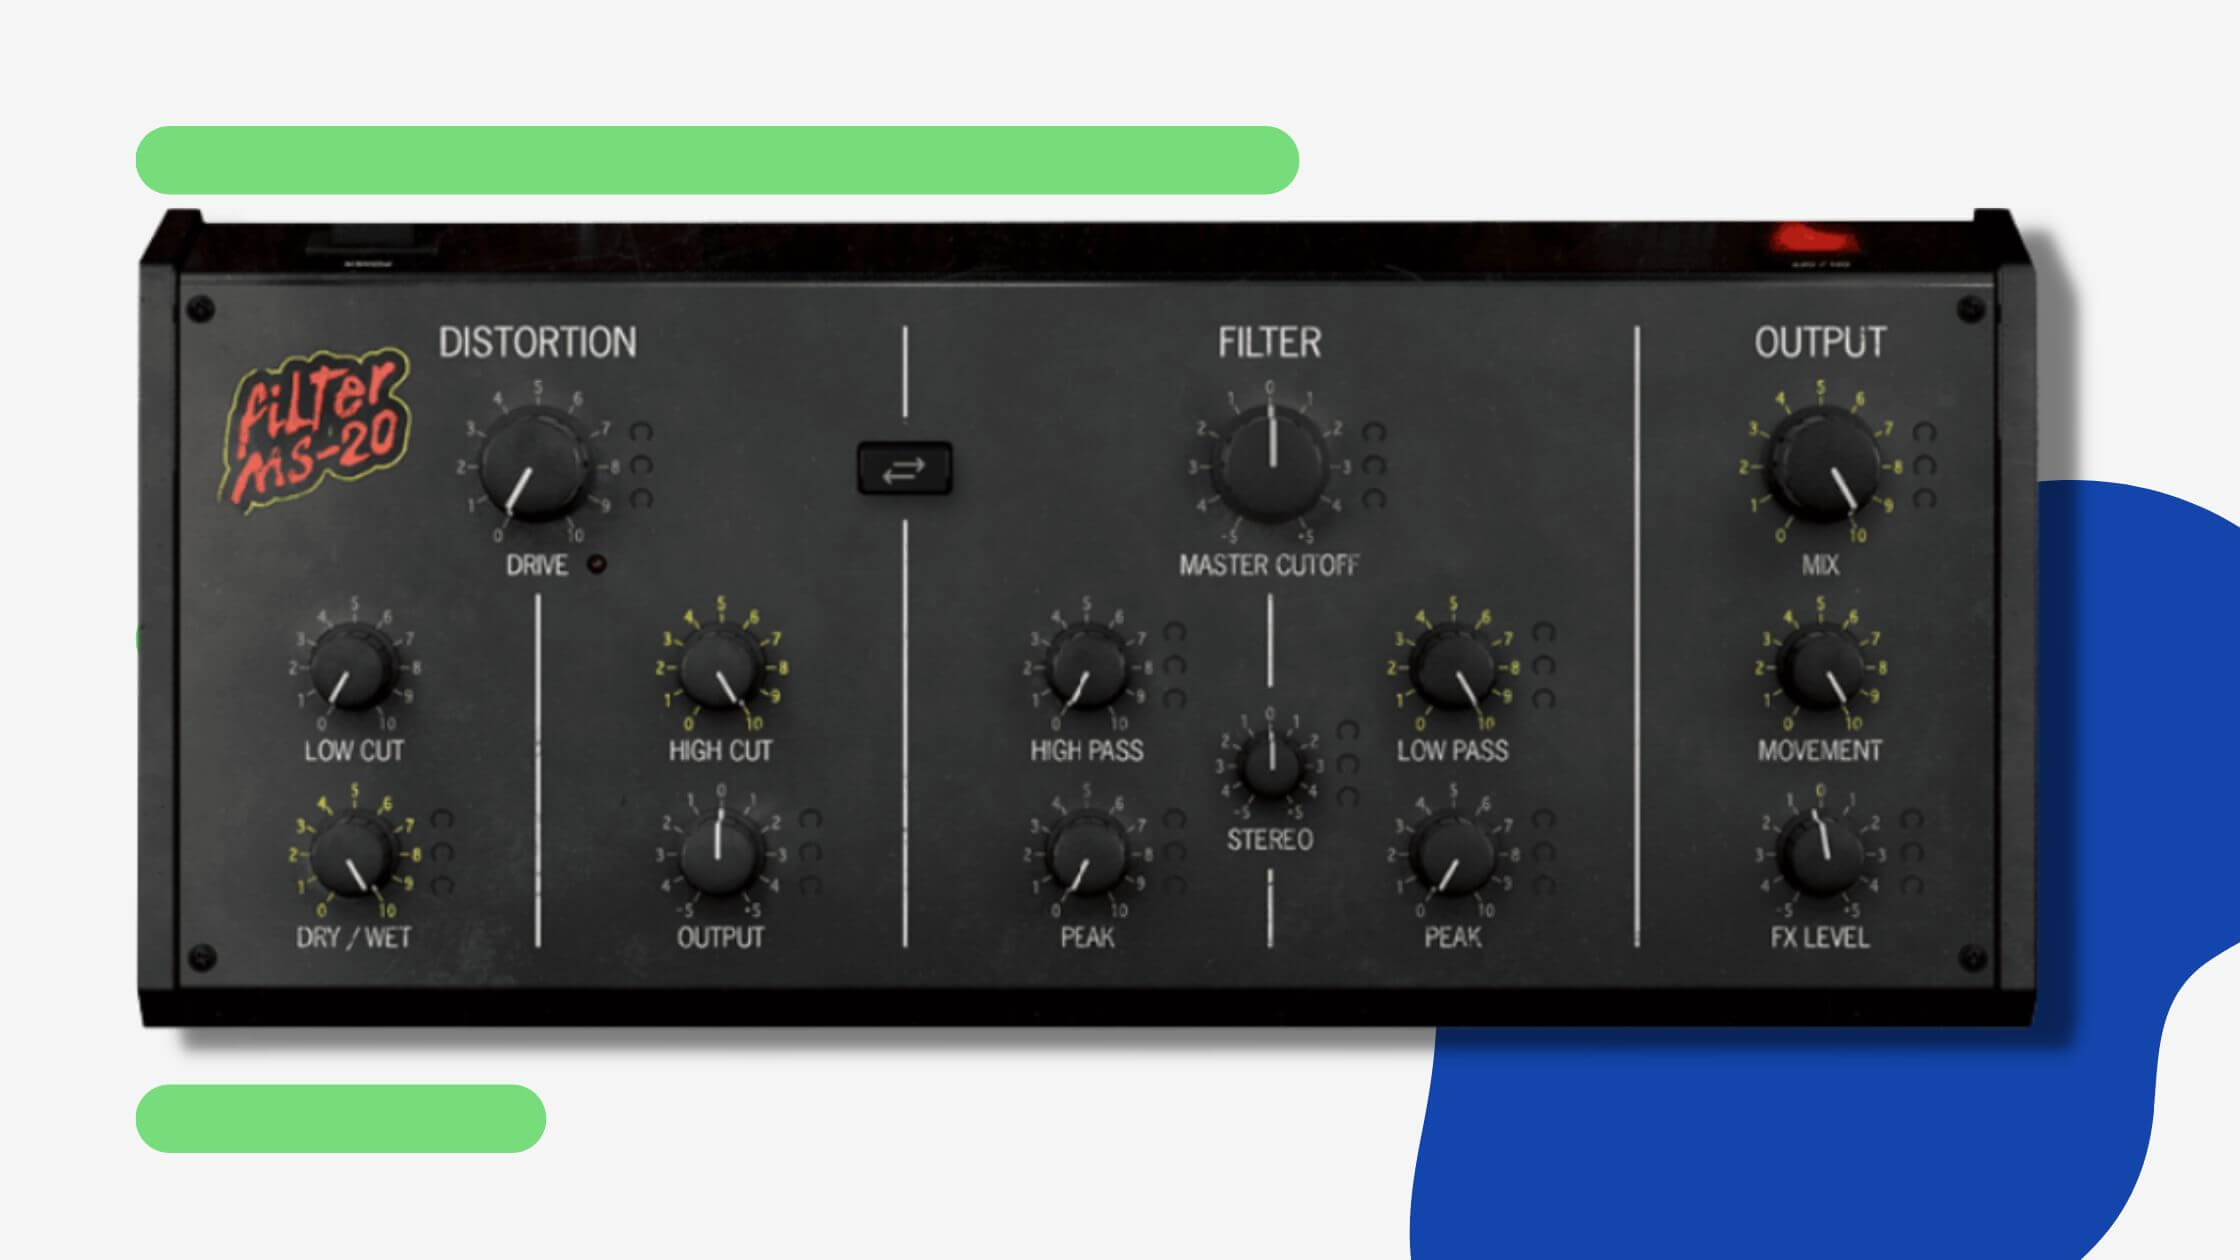 Arturia releases free Filter MS-20 plugin as an epic early Christmas present